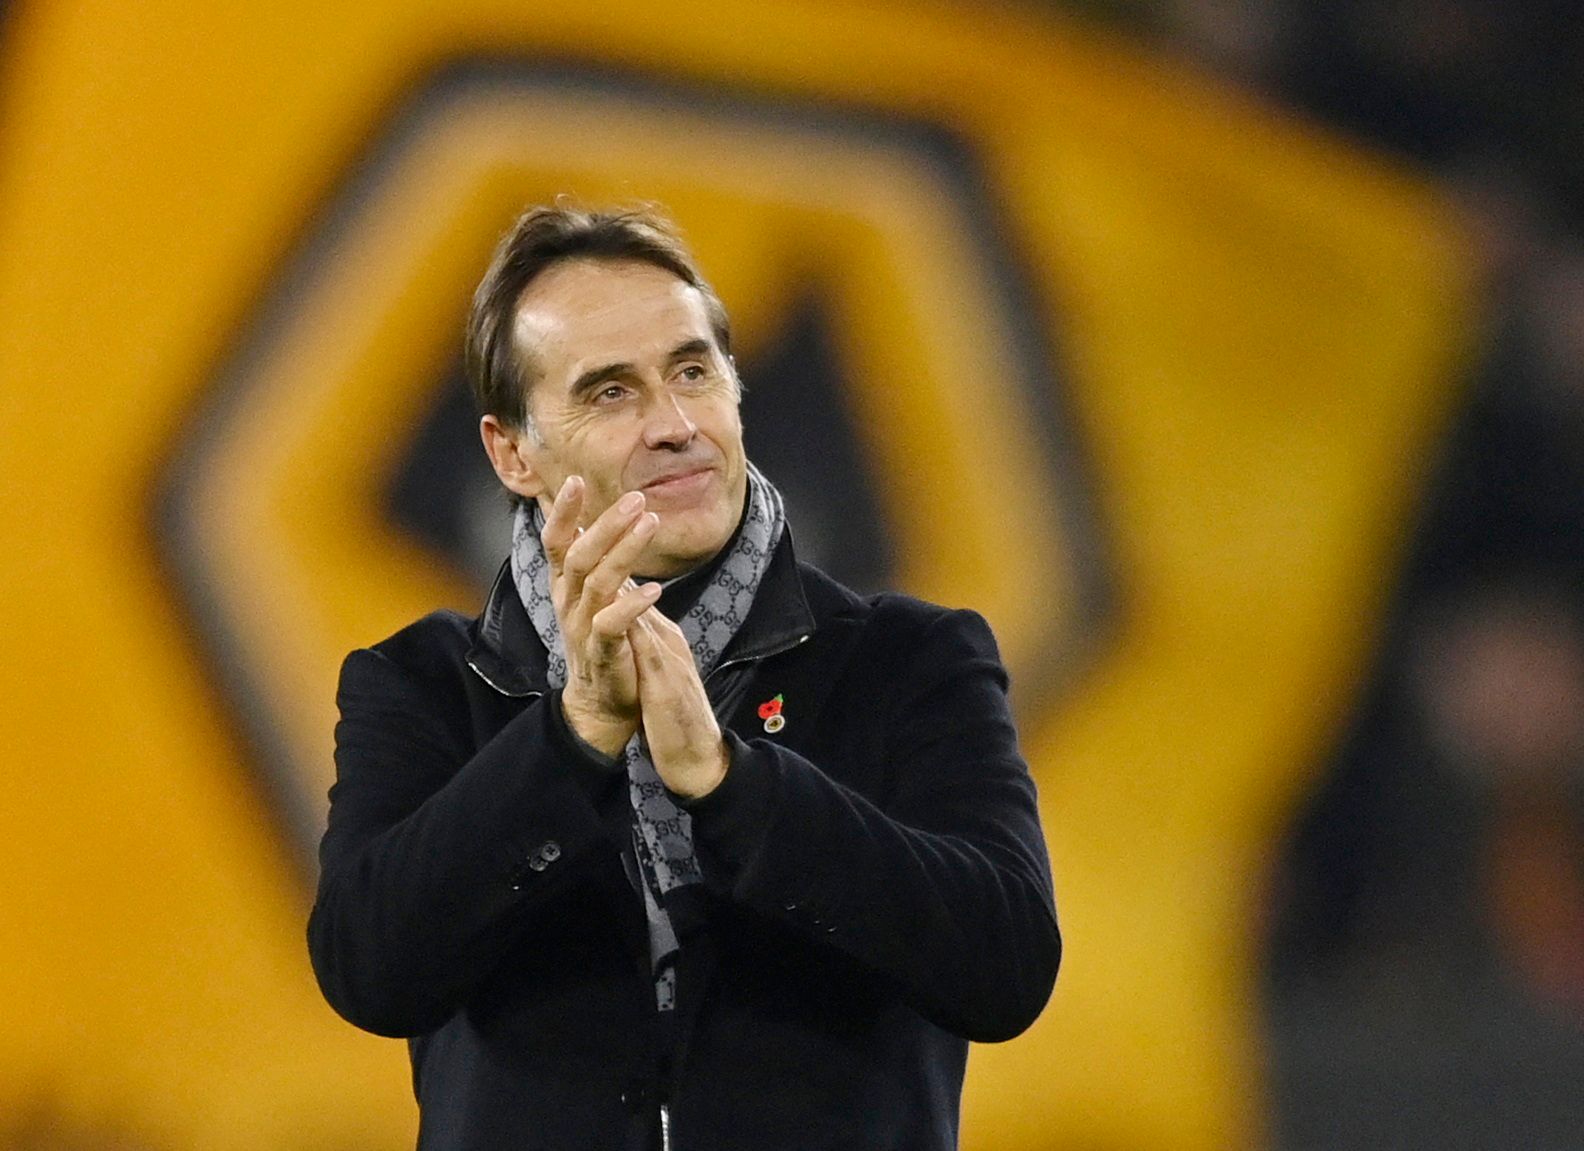 Soccer Football - Premier League - Wolverhampton Wanderers v Arsenal - Molineux Stadium, Wolverhampton, Britain - November 12, 2022 Wolverhampton Wanderers manager Julen Lopetegui before the match REUTERS/Tony Obrien EDITORIAL USE ONLY. No use with unauthorized audio, video, data, fixture lists, club/league logos or 'live' services. Online in-match use limited to 75 images, no video emulation. No use in betting, games or single club /league/player publications.  Please contact your account repre